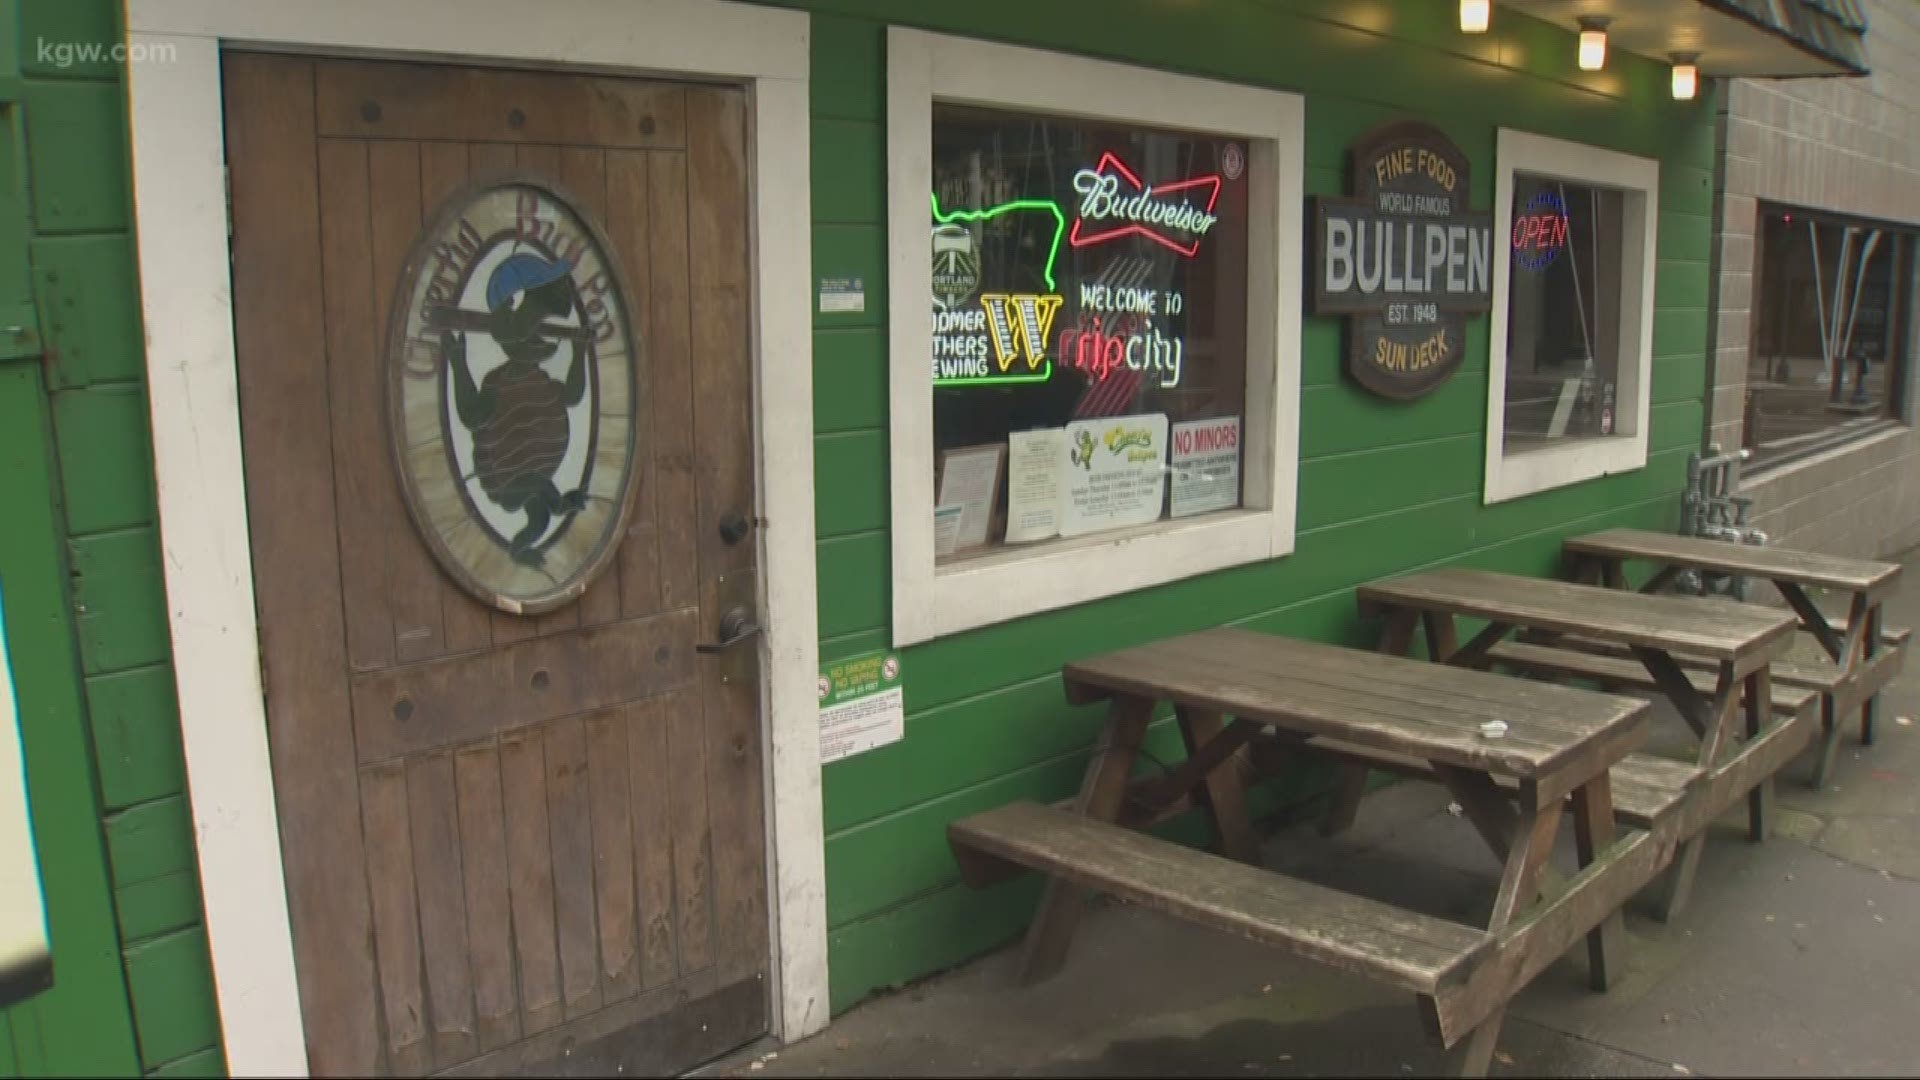 A Southwest Portland pub owner turned to social media to rally customers to help after break-in.